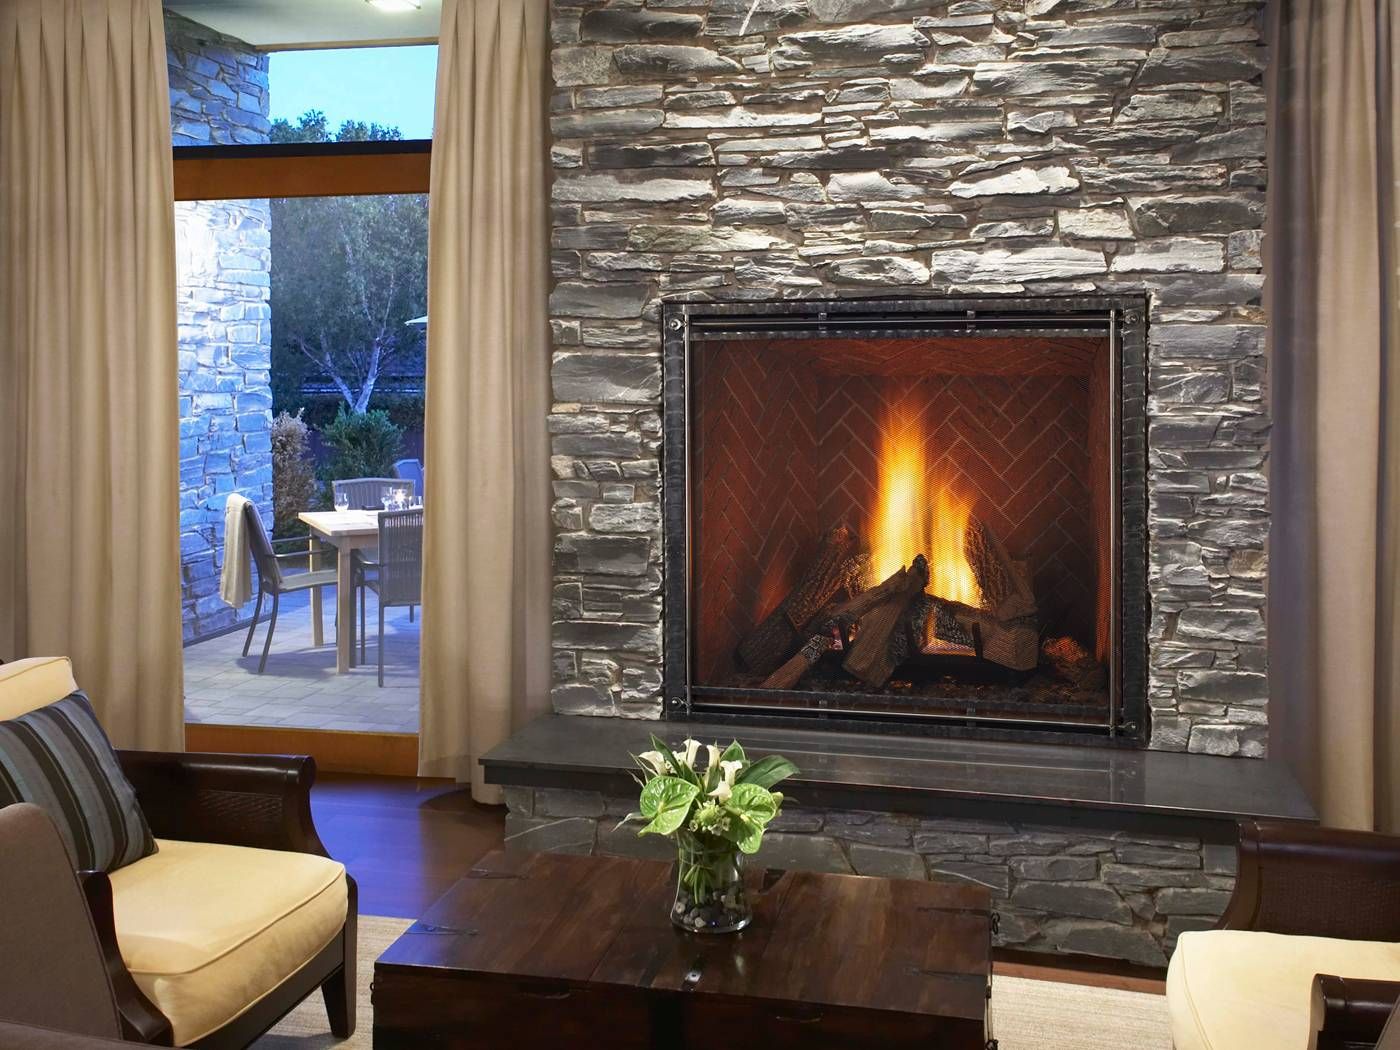 Heat and Glo Fireplace Inserts Luxury True Fireplace by Heat N Glo Huge Fire Box for Maximum